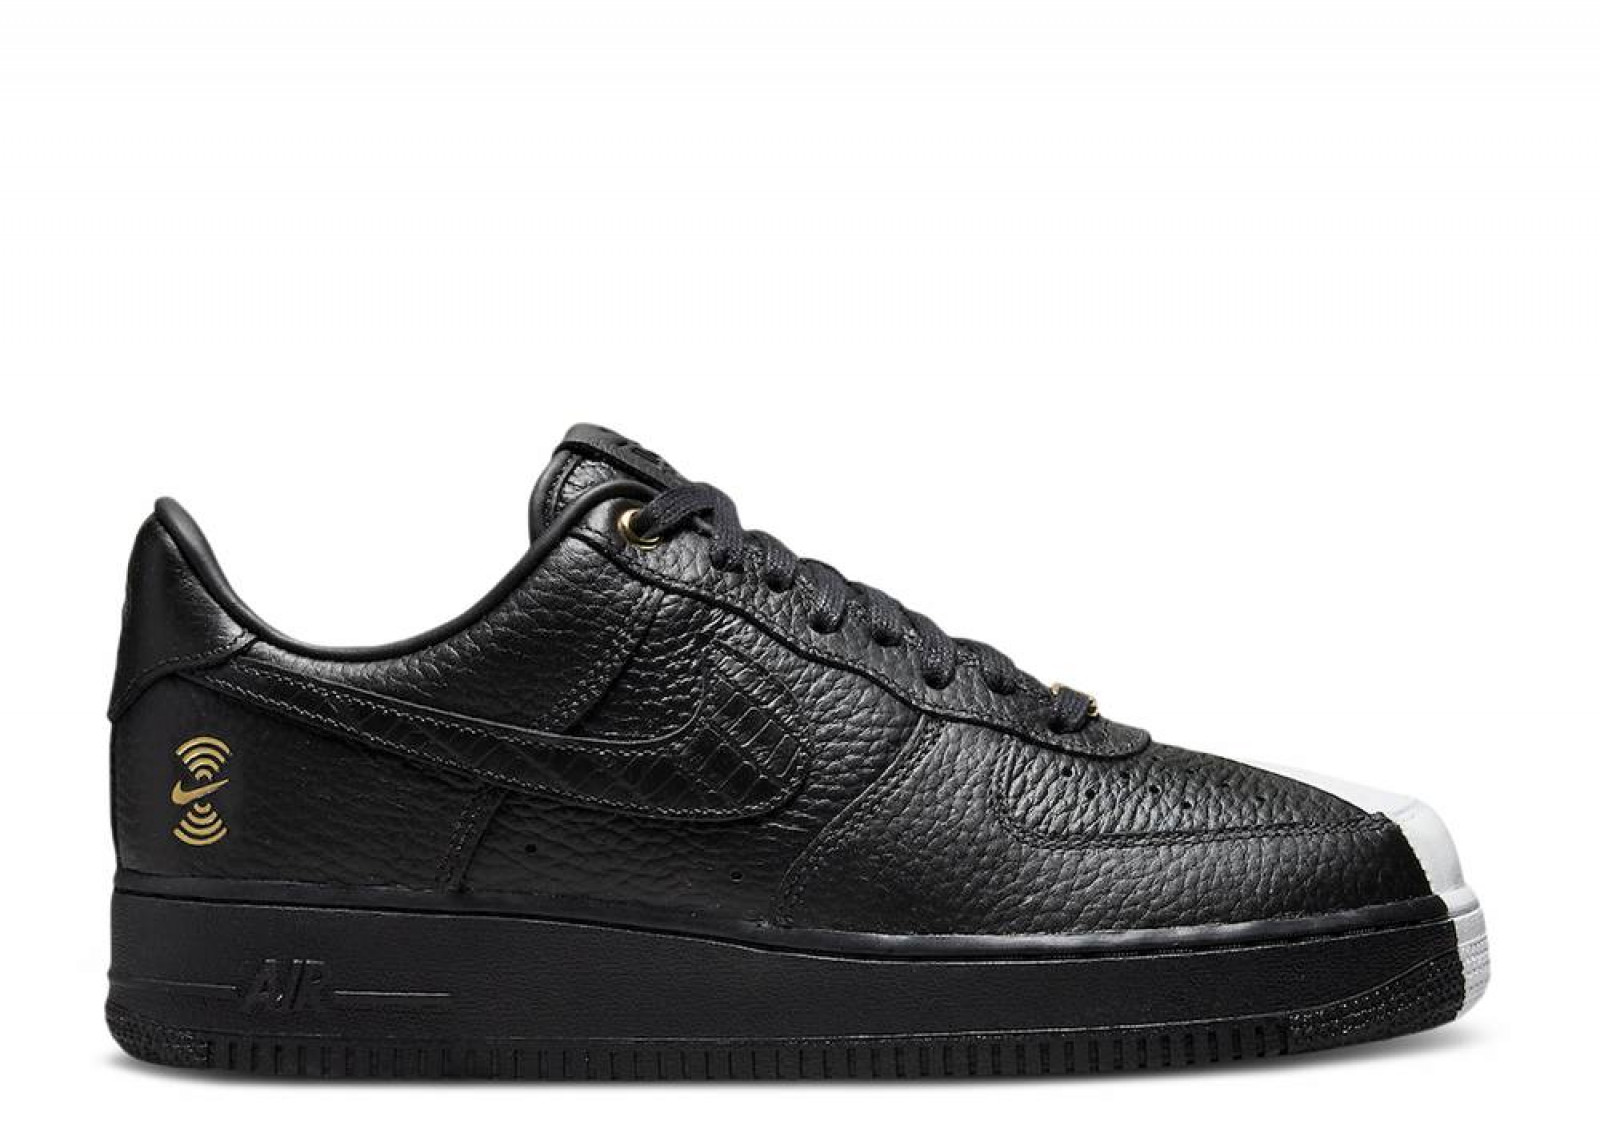 AIR FORCE 1 LOW ANNIVERSARY EDITION SPLIT BLACK WHITE image 1